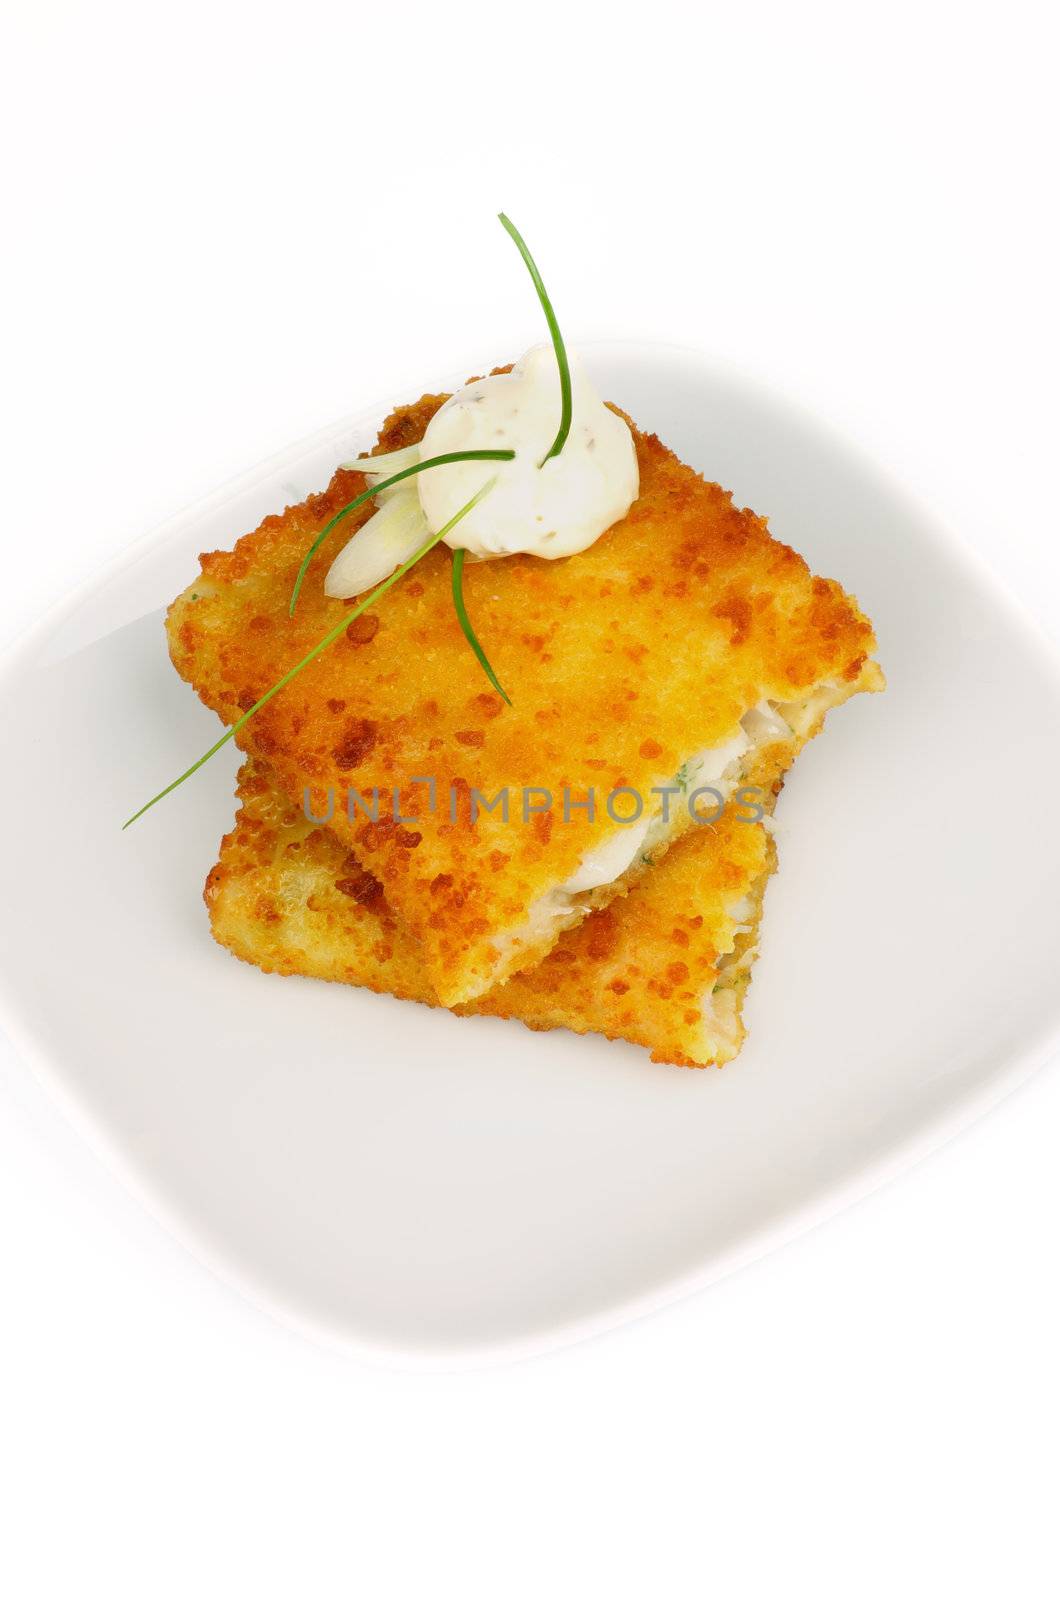 Breaded Сod Fillet with Spring Onion and Tartar Sauce on White Plate. Top View